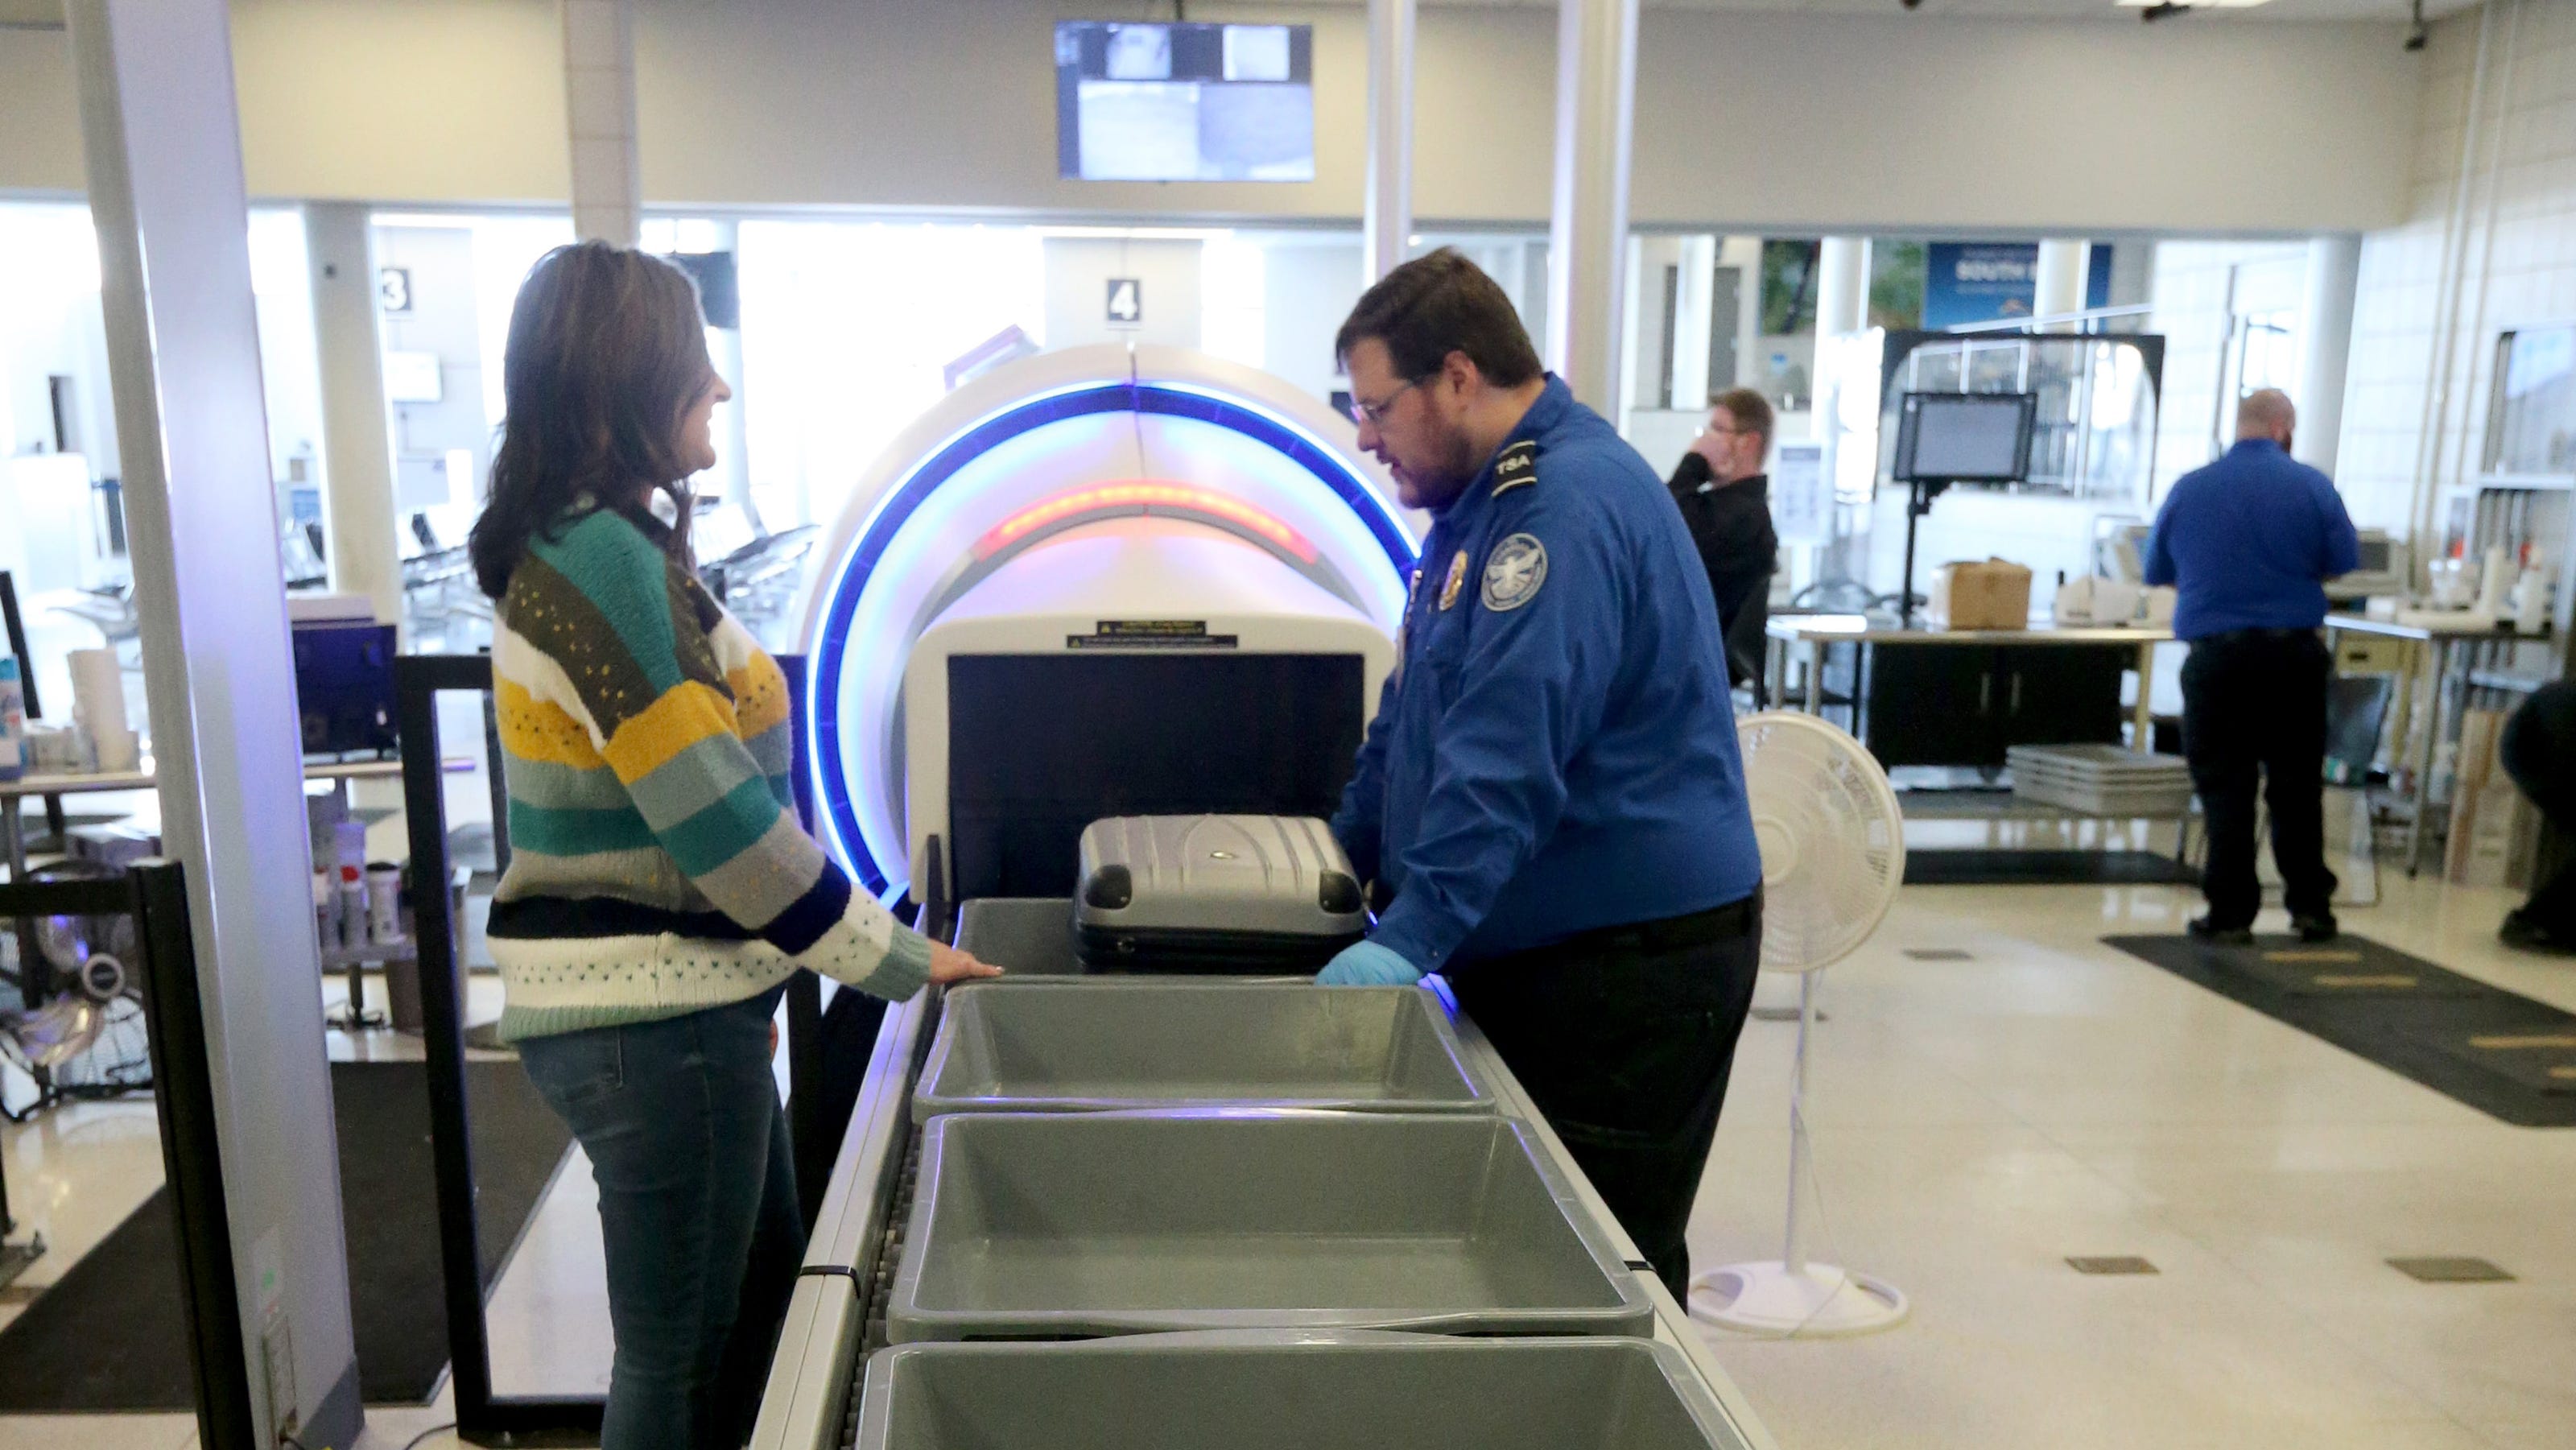 TSA confiscated 11 guns at South Bend airport in 2022, up from 2021